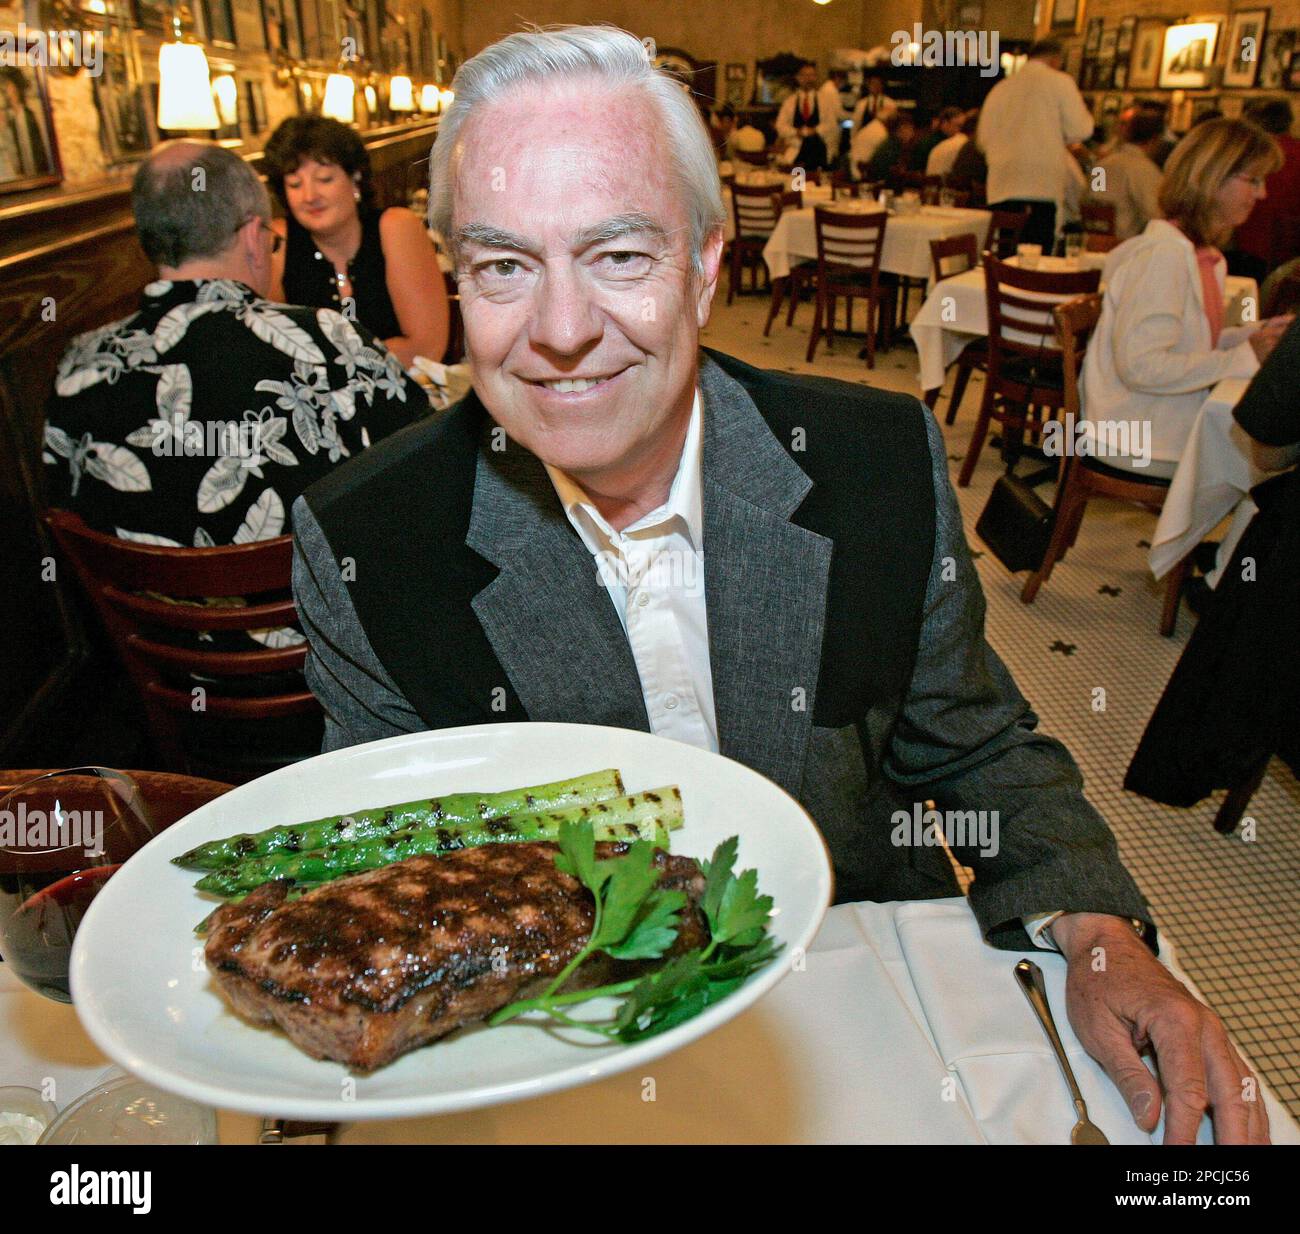 Bill Kurtis, television show host and former news anchor, holds a plate of  "designer beef" from his Tallgrass Beef Company Thursday, Aug. 31, 2006, at  Harry Caray's restaurant in Chicago. Kurtis, whose